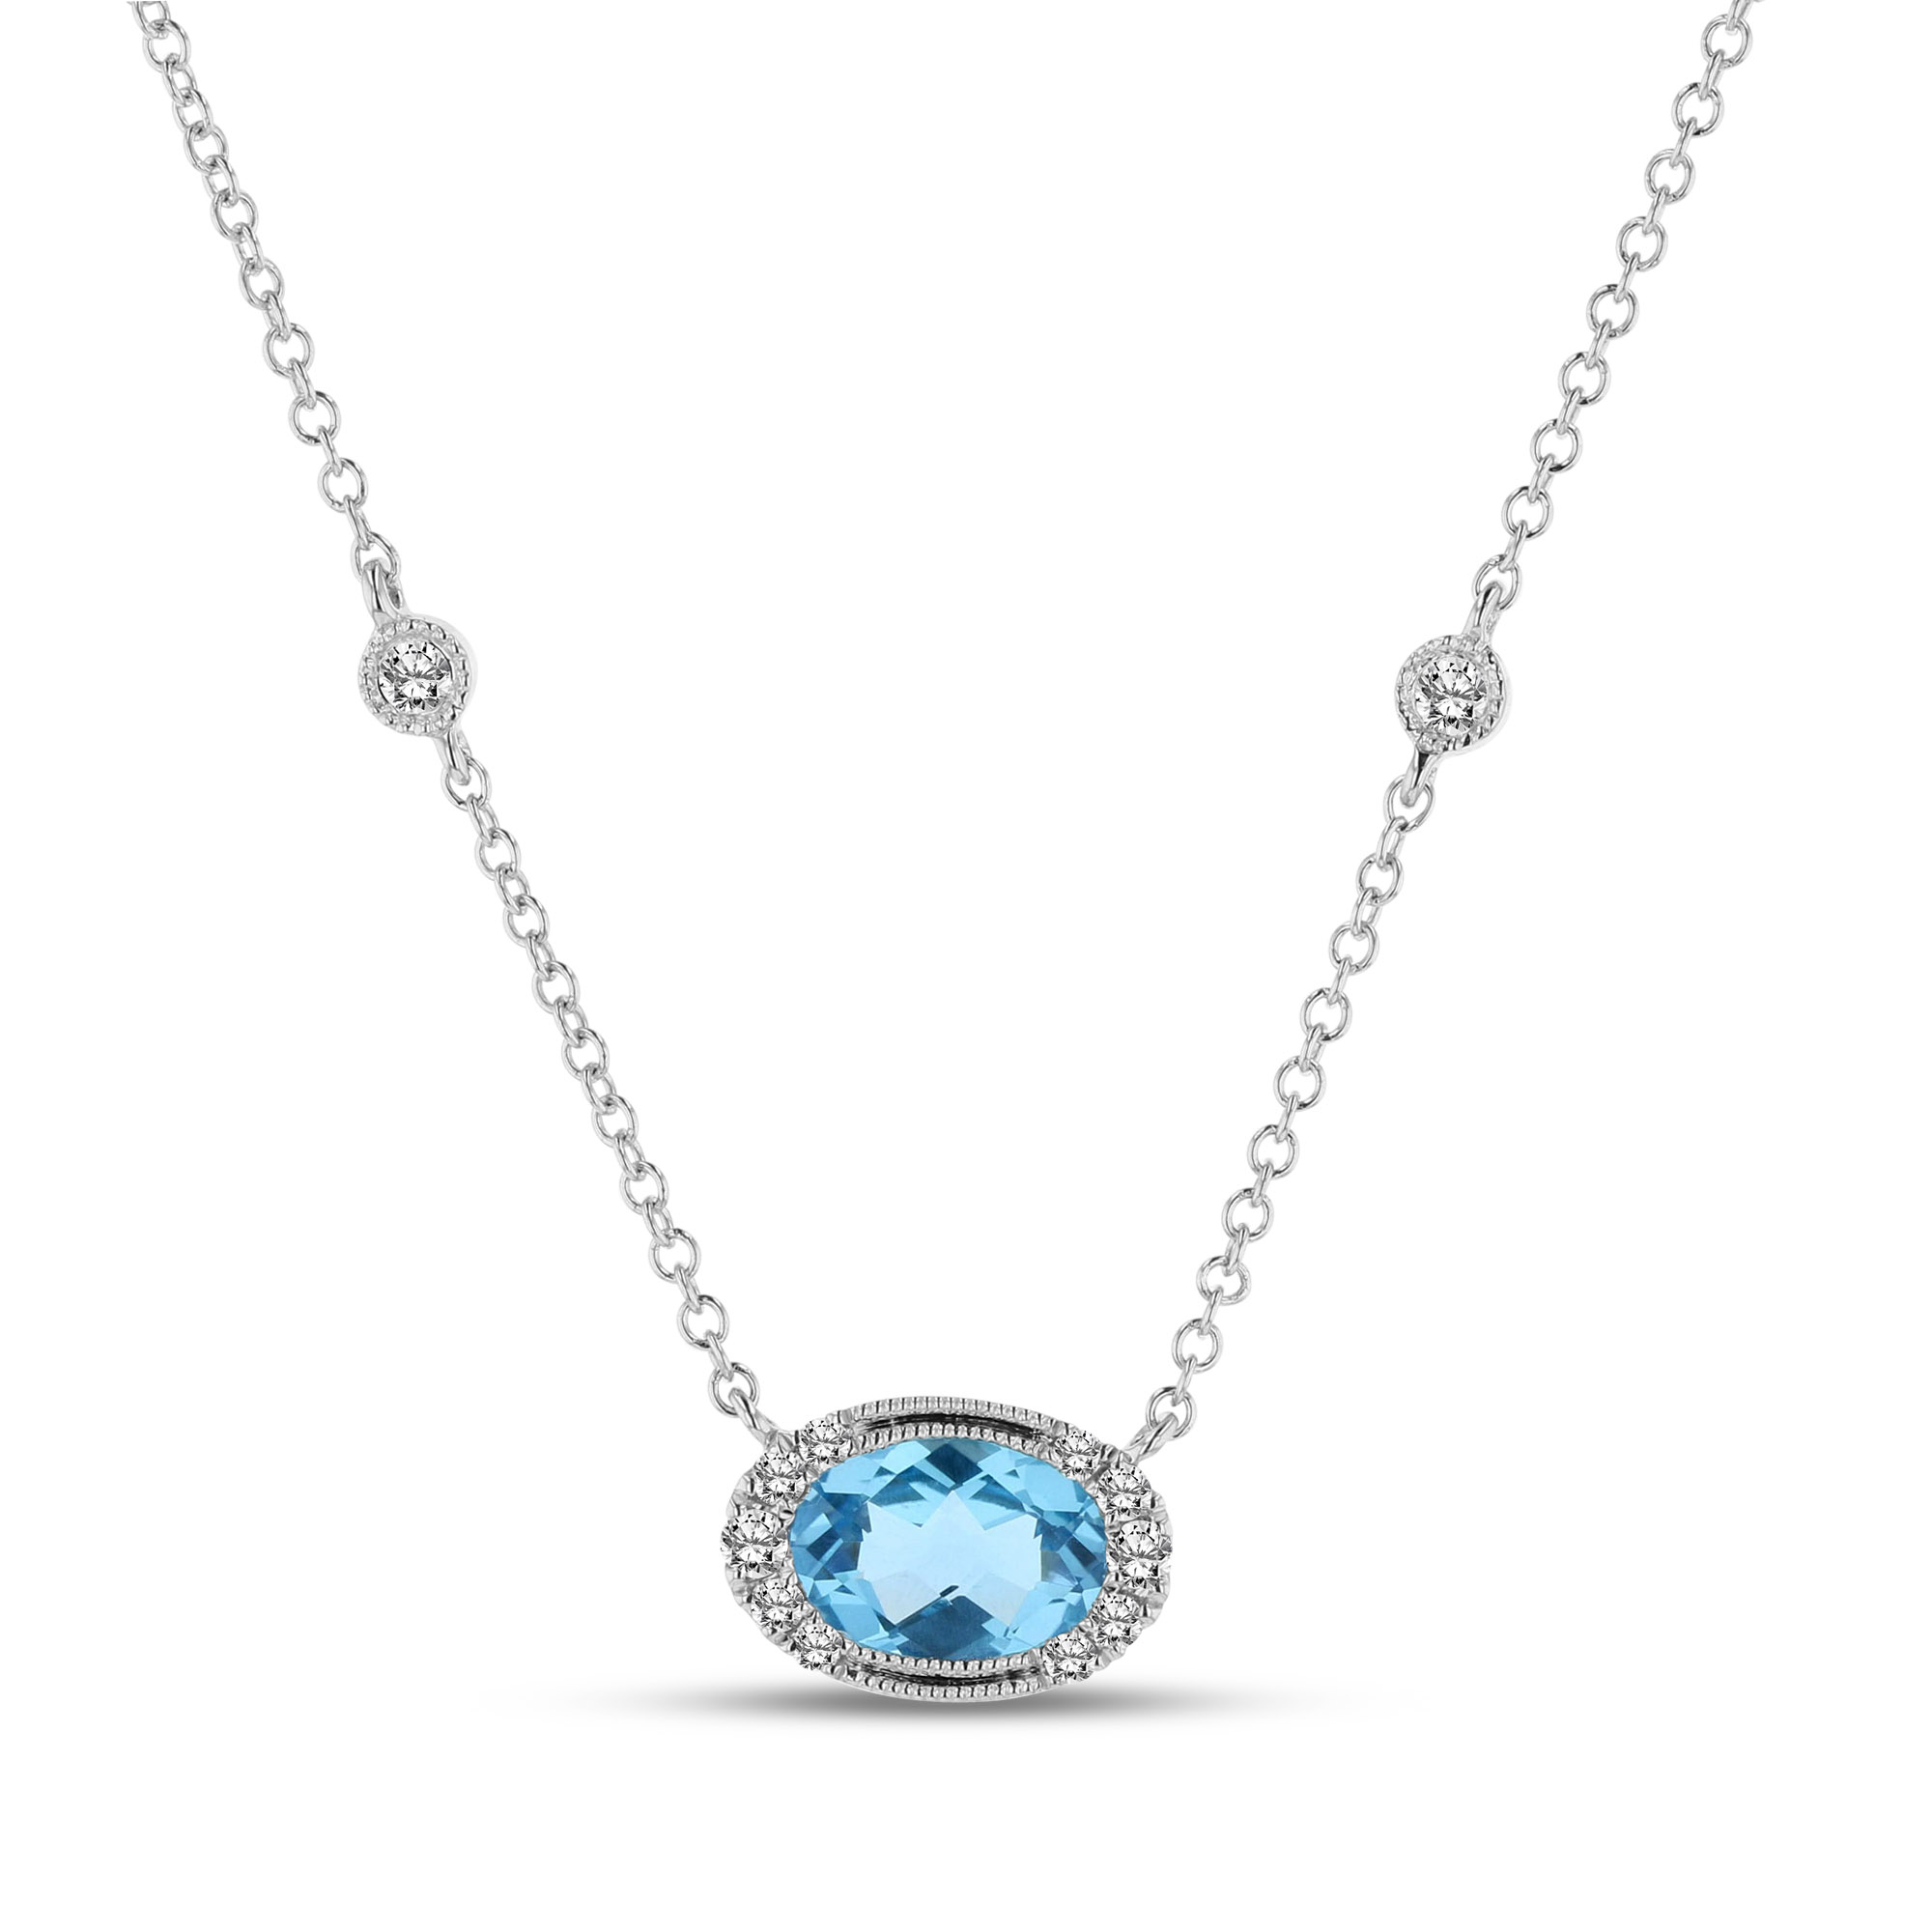 View 0.13ctw Diamond and Blue Topaz Pendant in 14k White Gold